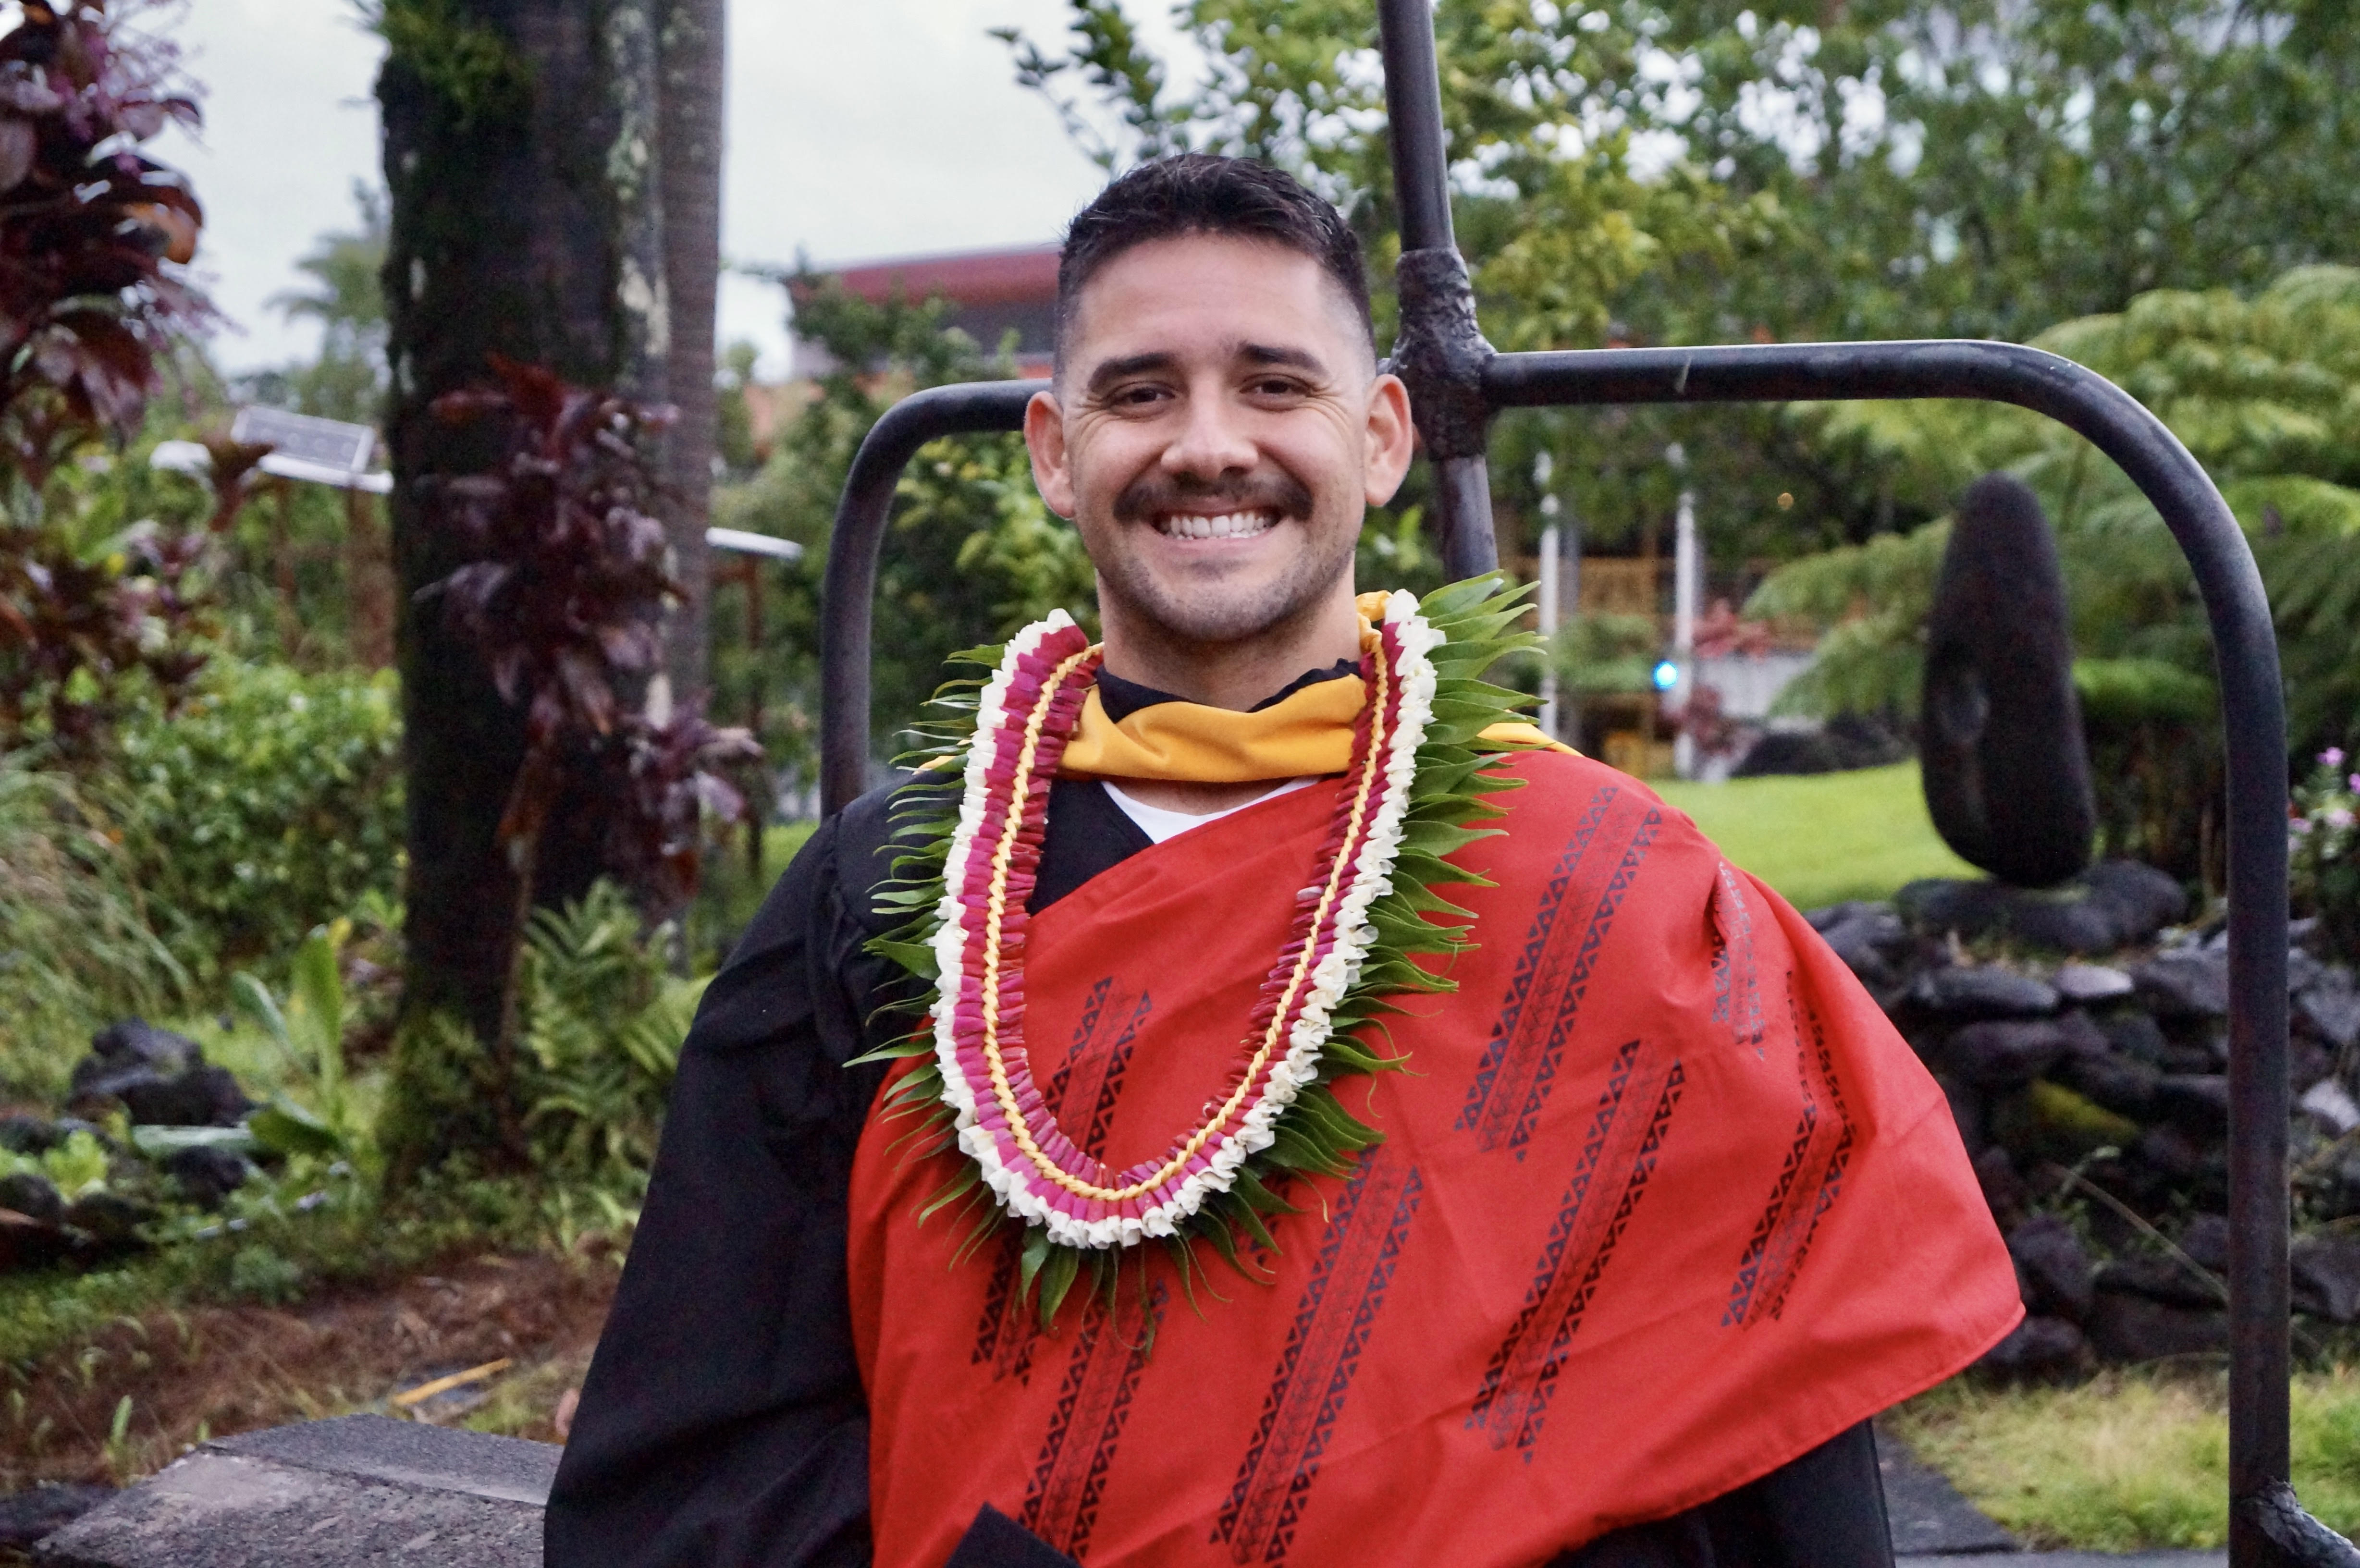 Young man smiling in graduation robes with a lei around his neck